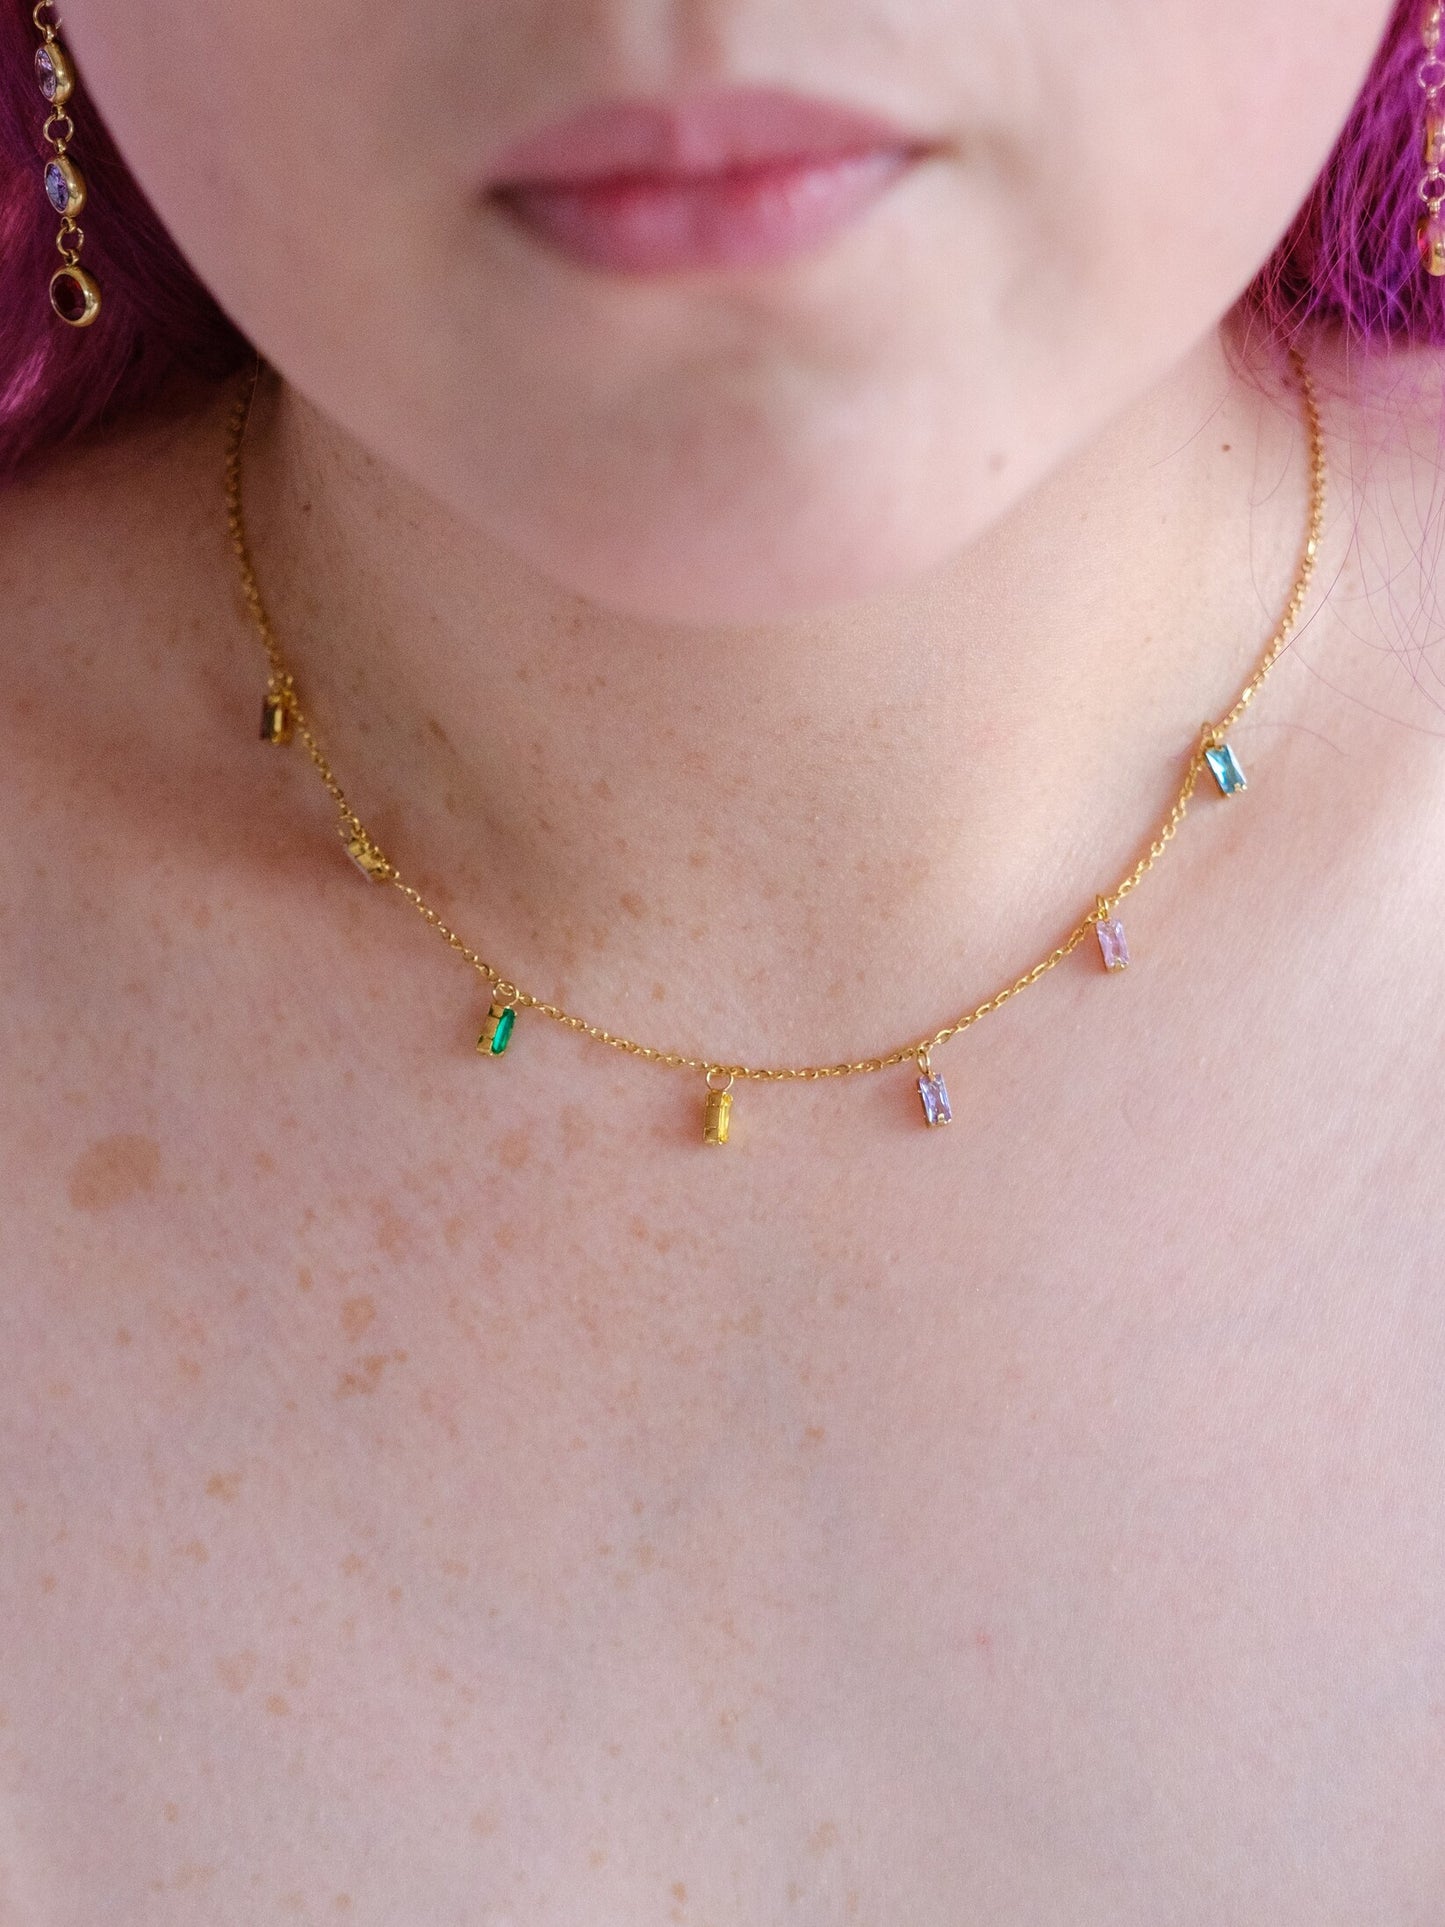 A woman wears a dainty gold necklace with dangling gems in multiple colours